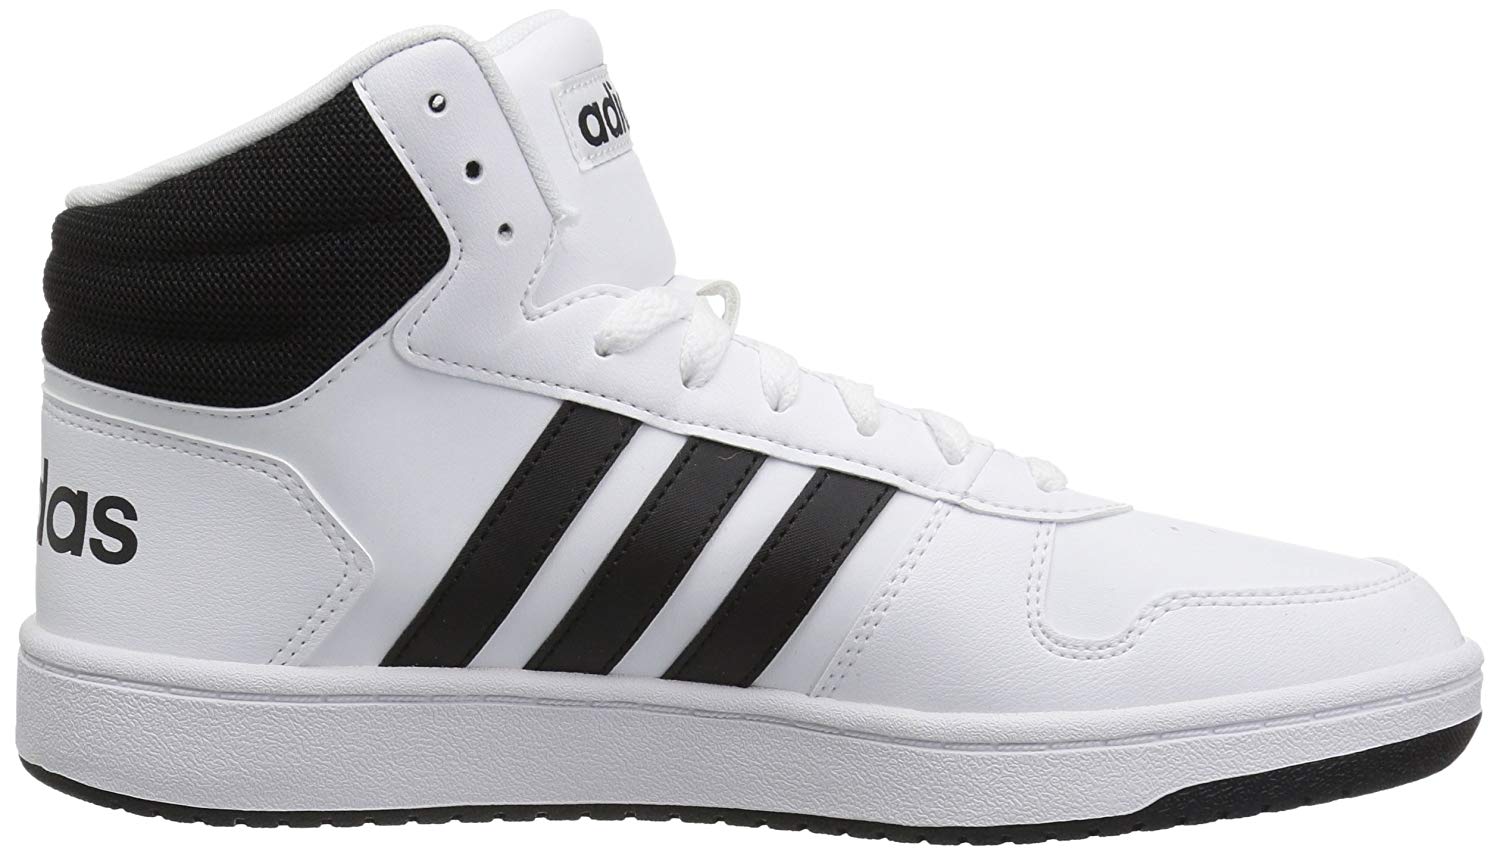 Adidas Mens Hoops 2.0 Low Top Lace Up Fashion, White/Black/Black, Size ...